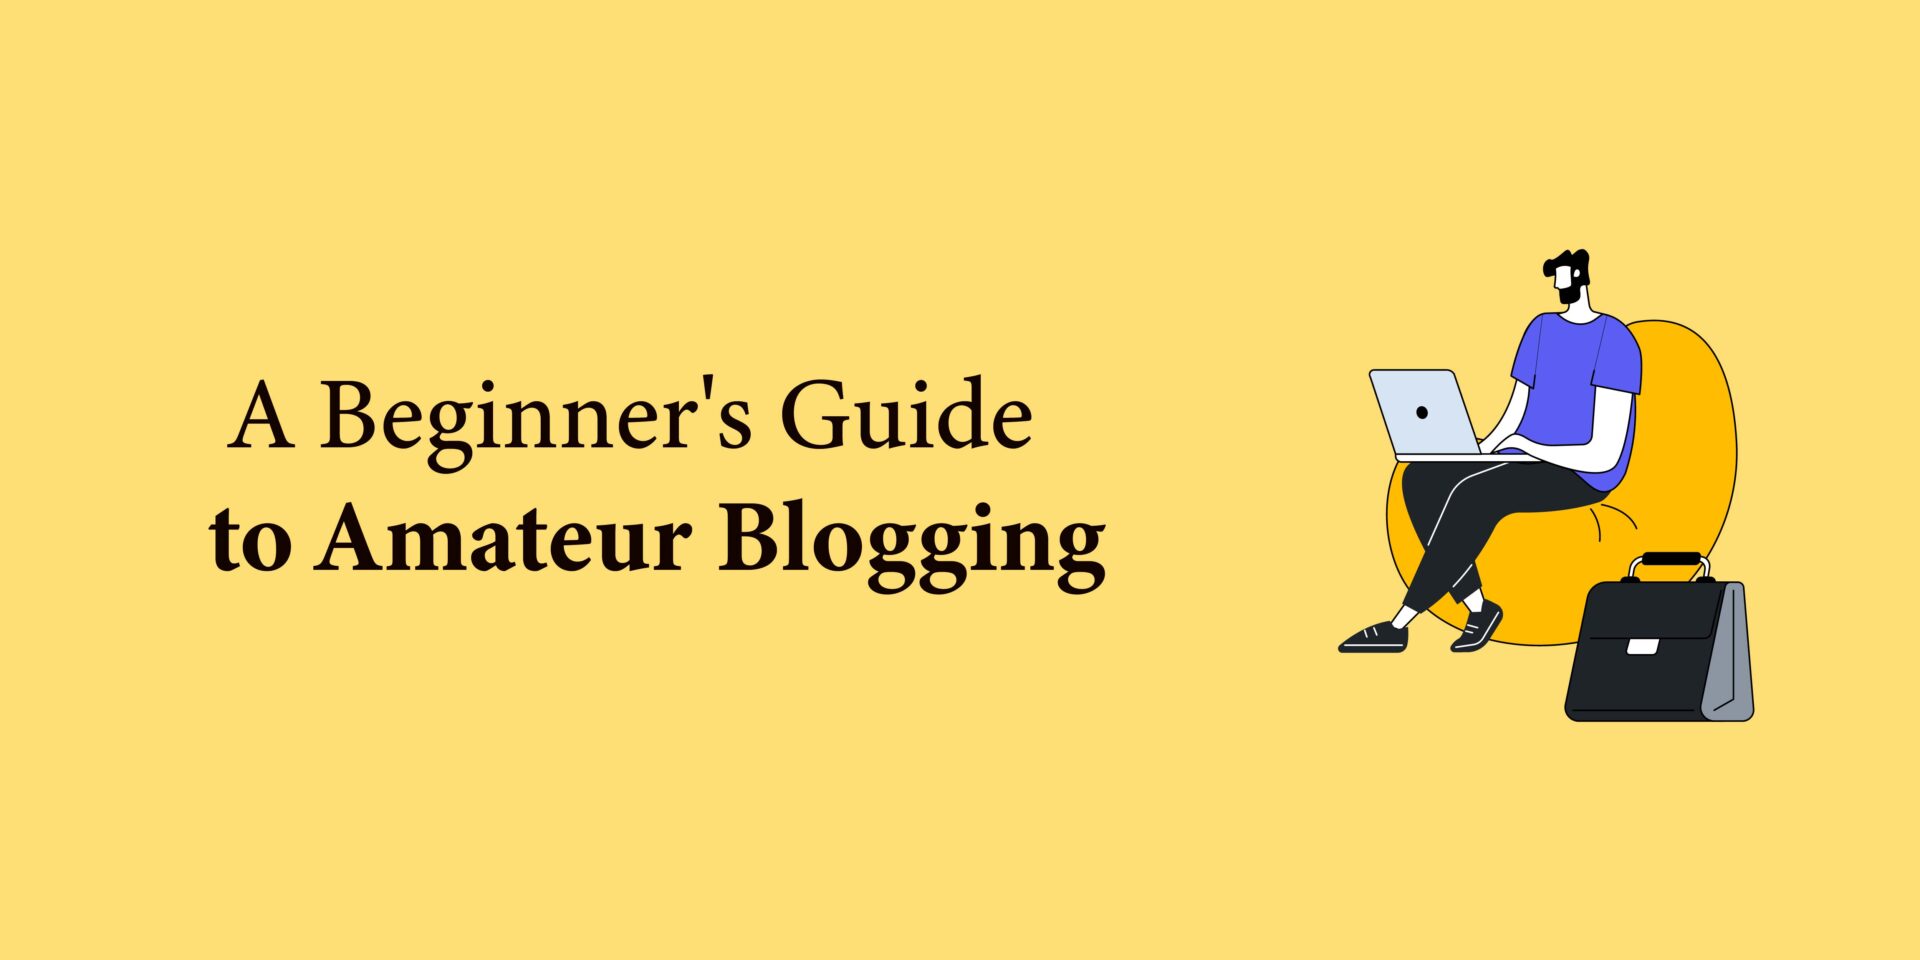 A Beginner's Guide to Amateur Blogging